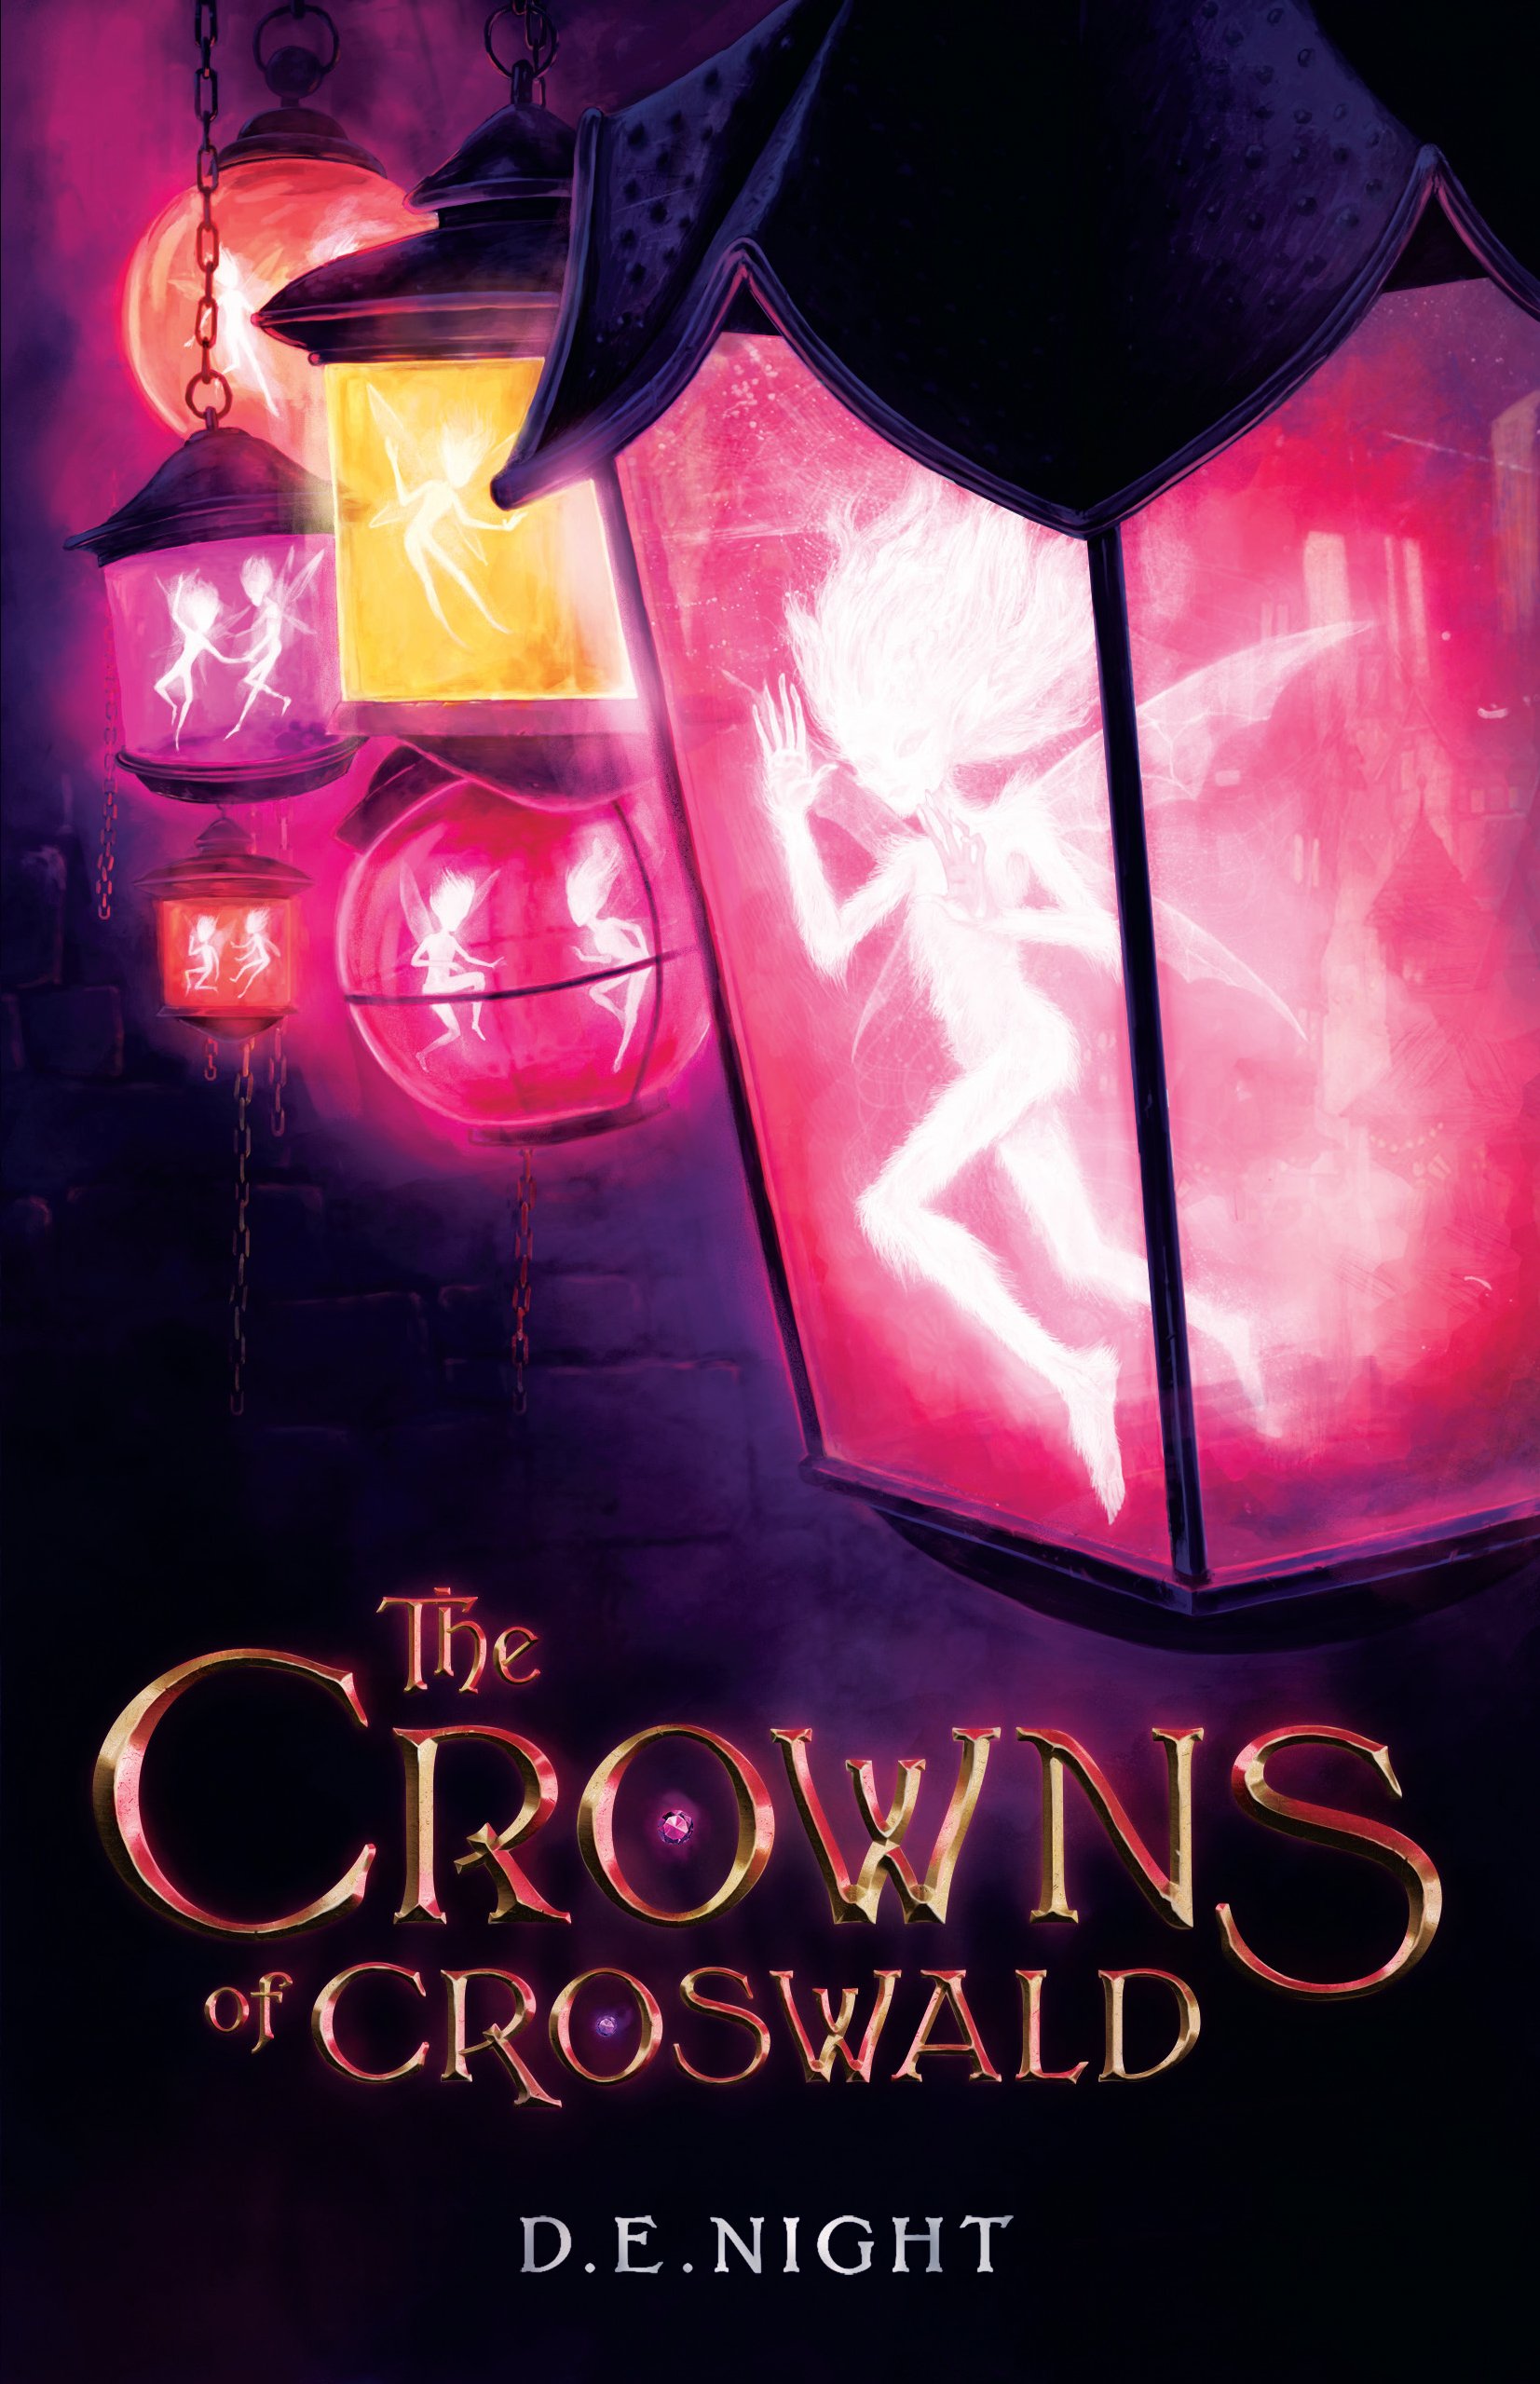 The Crowns of Croswald